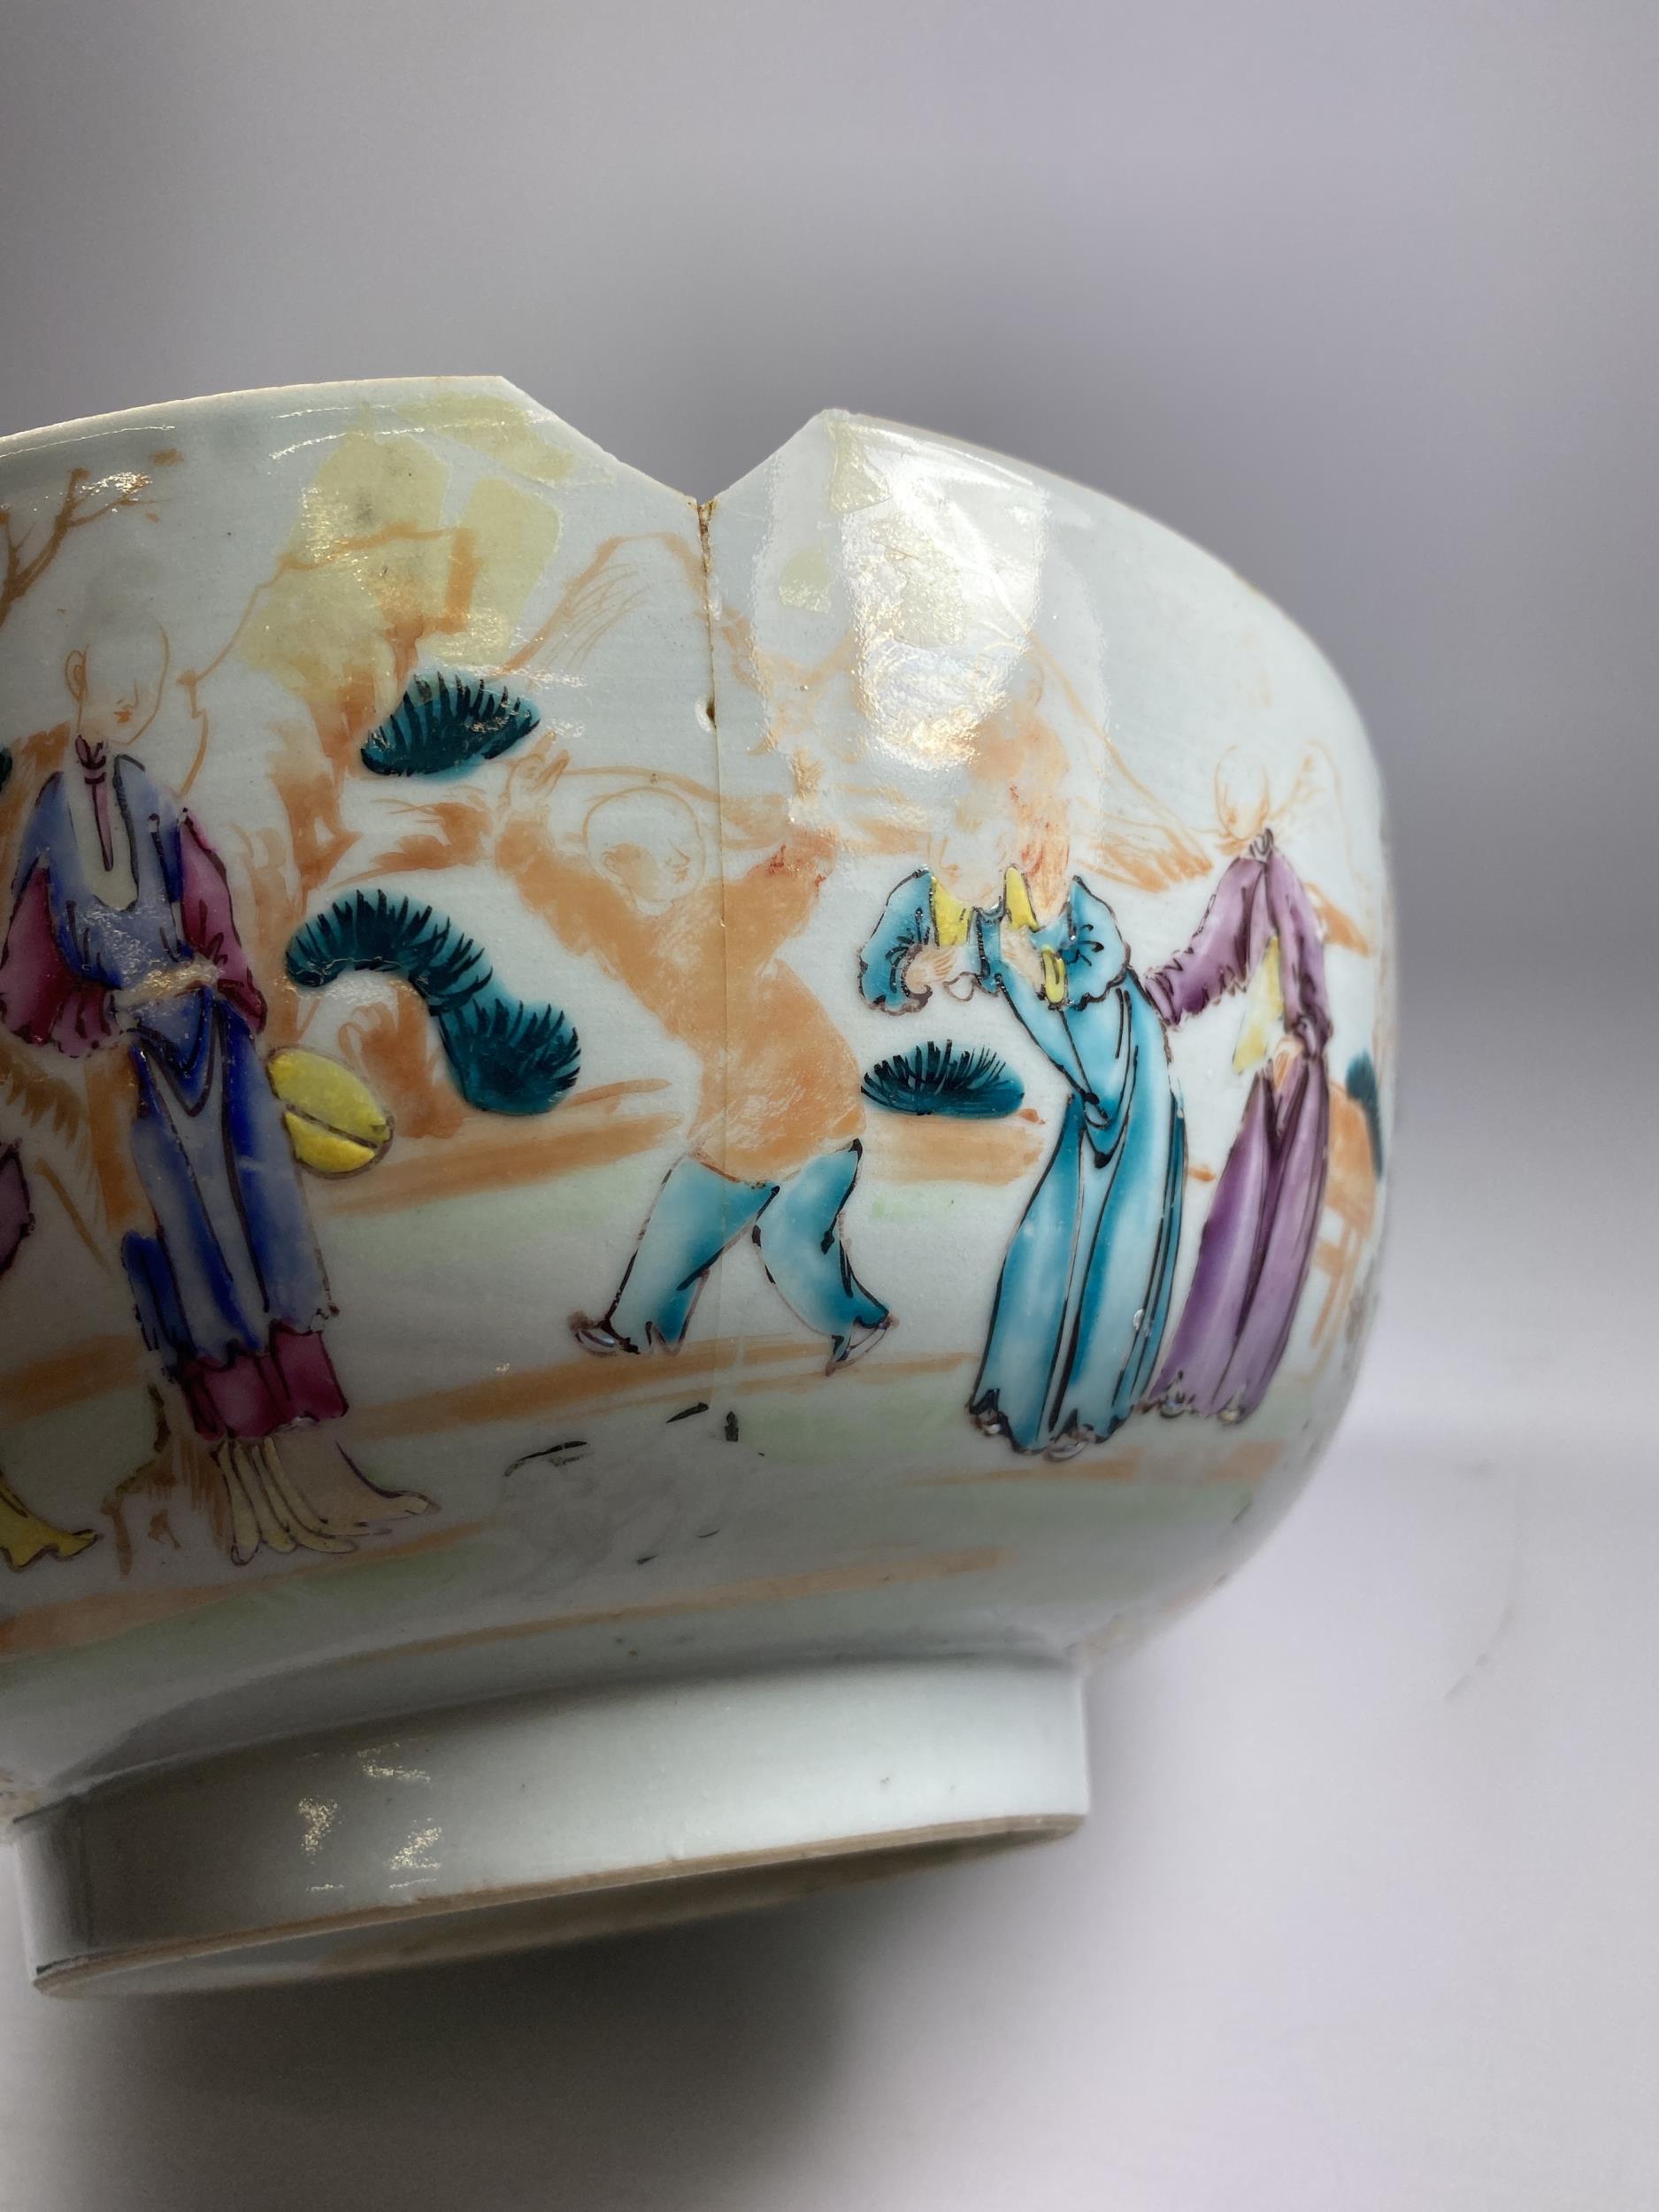 A LATE 18TH CENTURY CHINESE PORCELAIN PUNCH / FRUIT BOWL DEPICTING FIGURES, DIAMETER 23CM (A/F) - Image 5 of 9